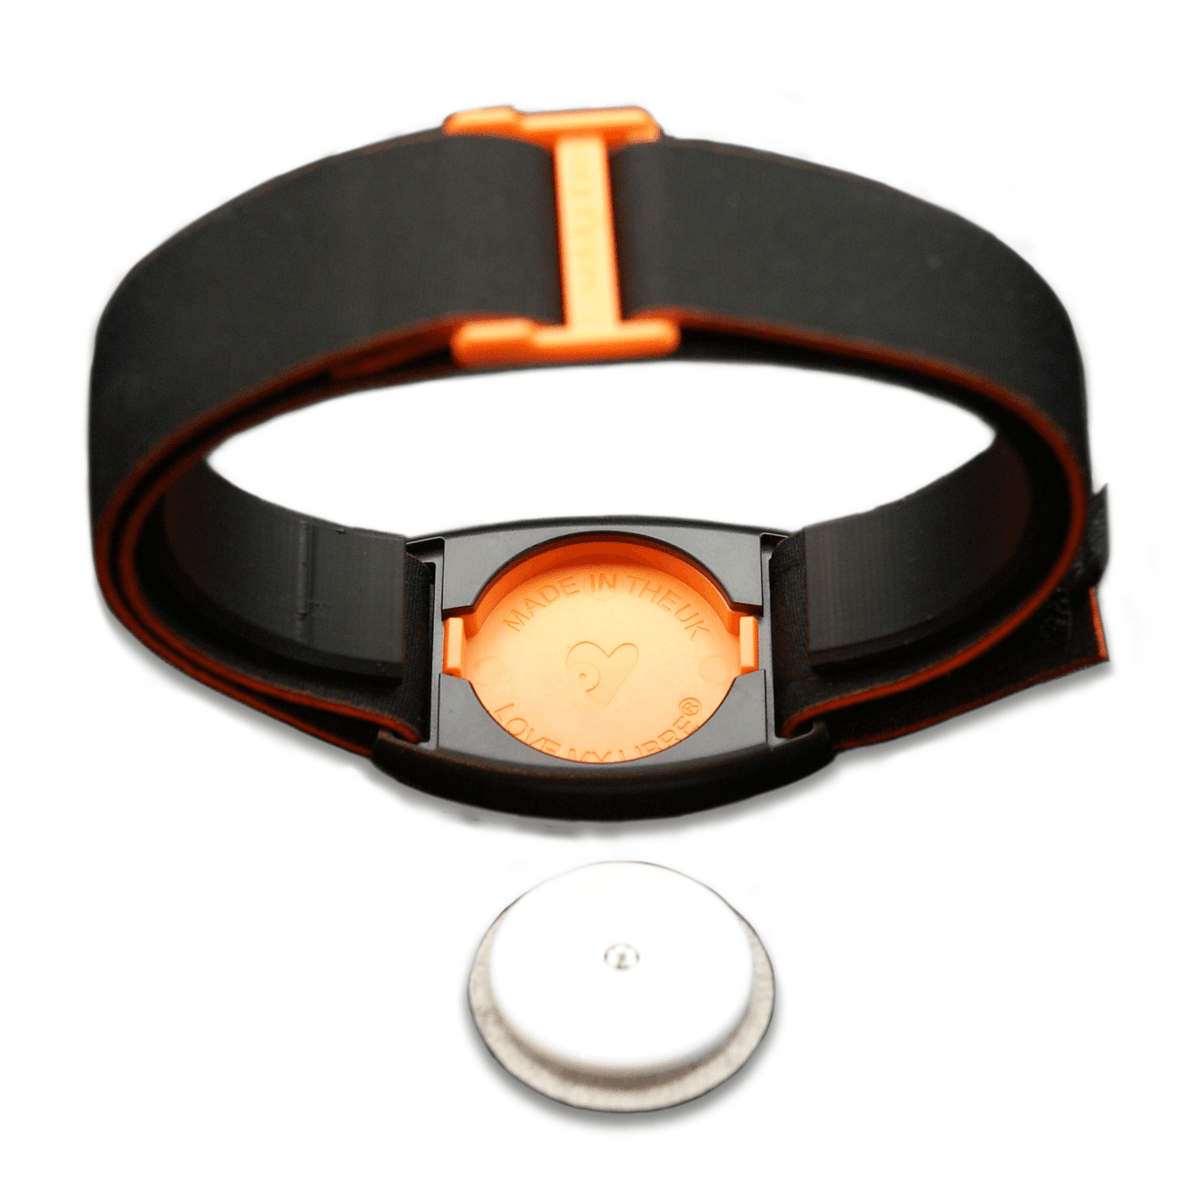 Libreband armband in reverse with orange cover.